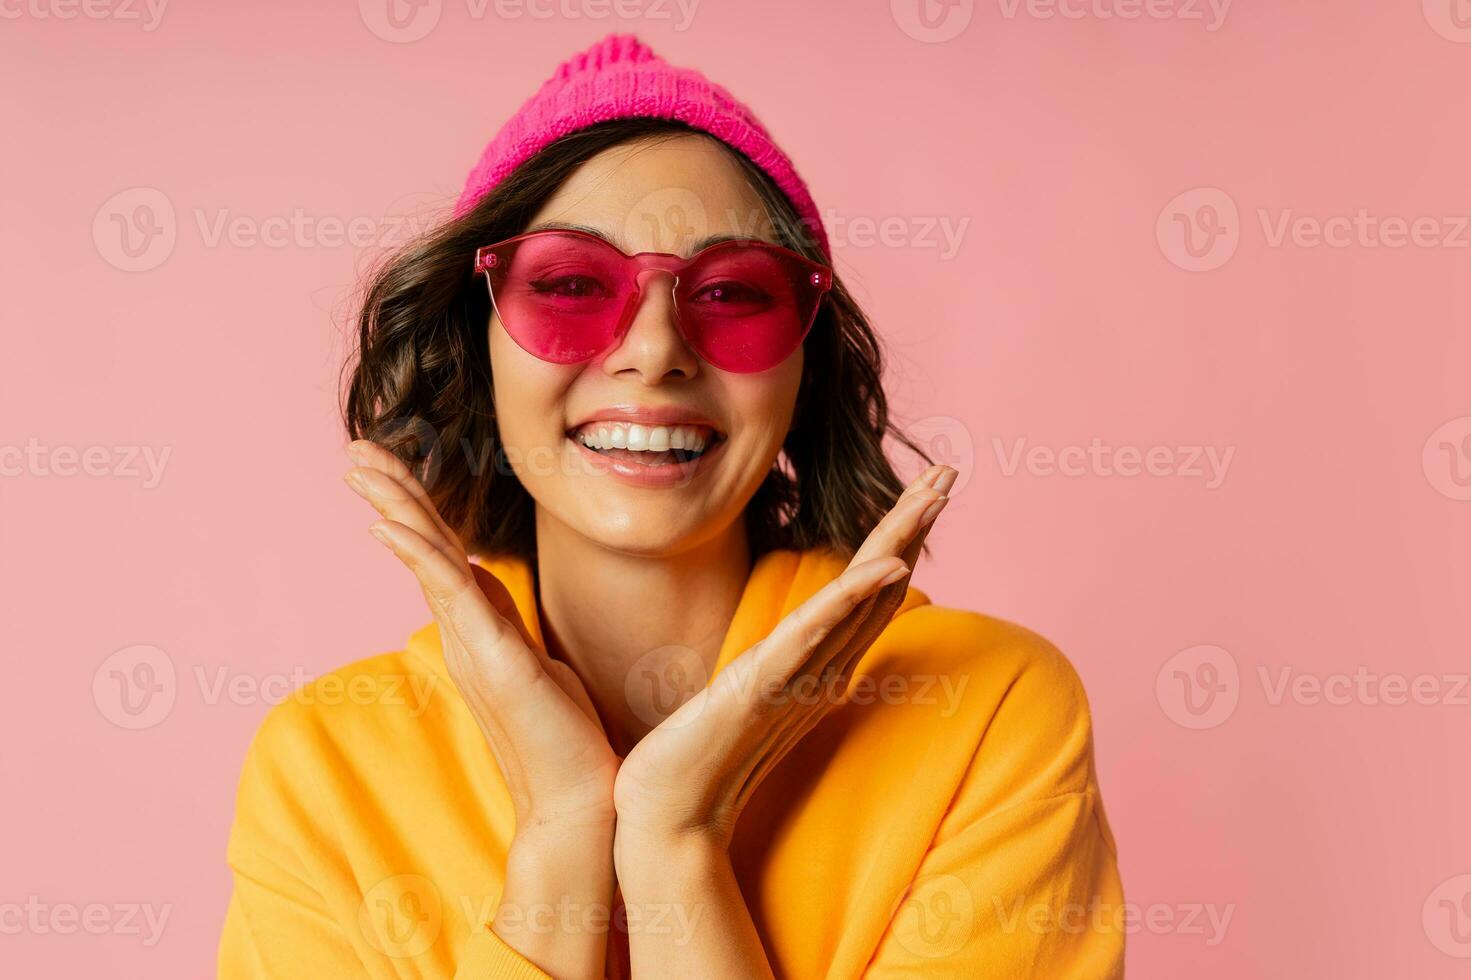 Woman in pink hat and  orange hoodie  with emotional face posing on pink bacground.  Stylish sunglasses. photo